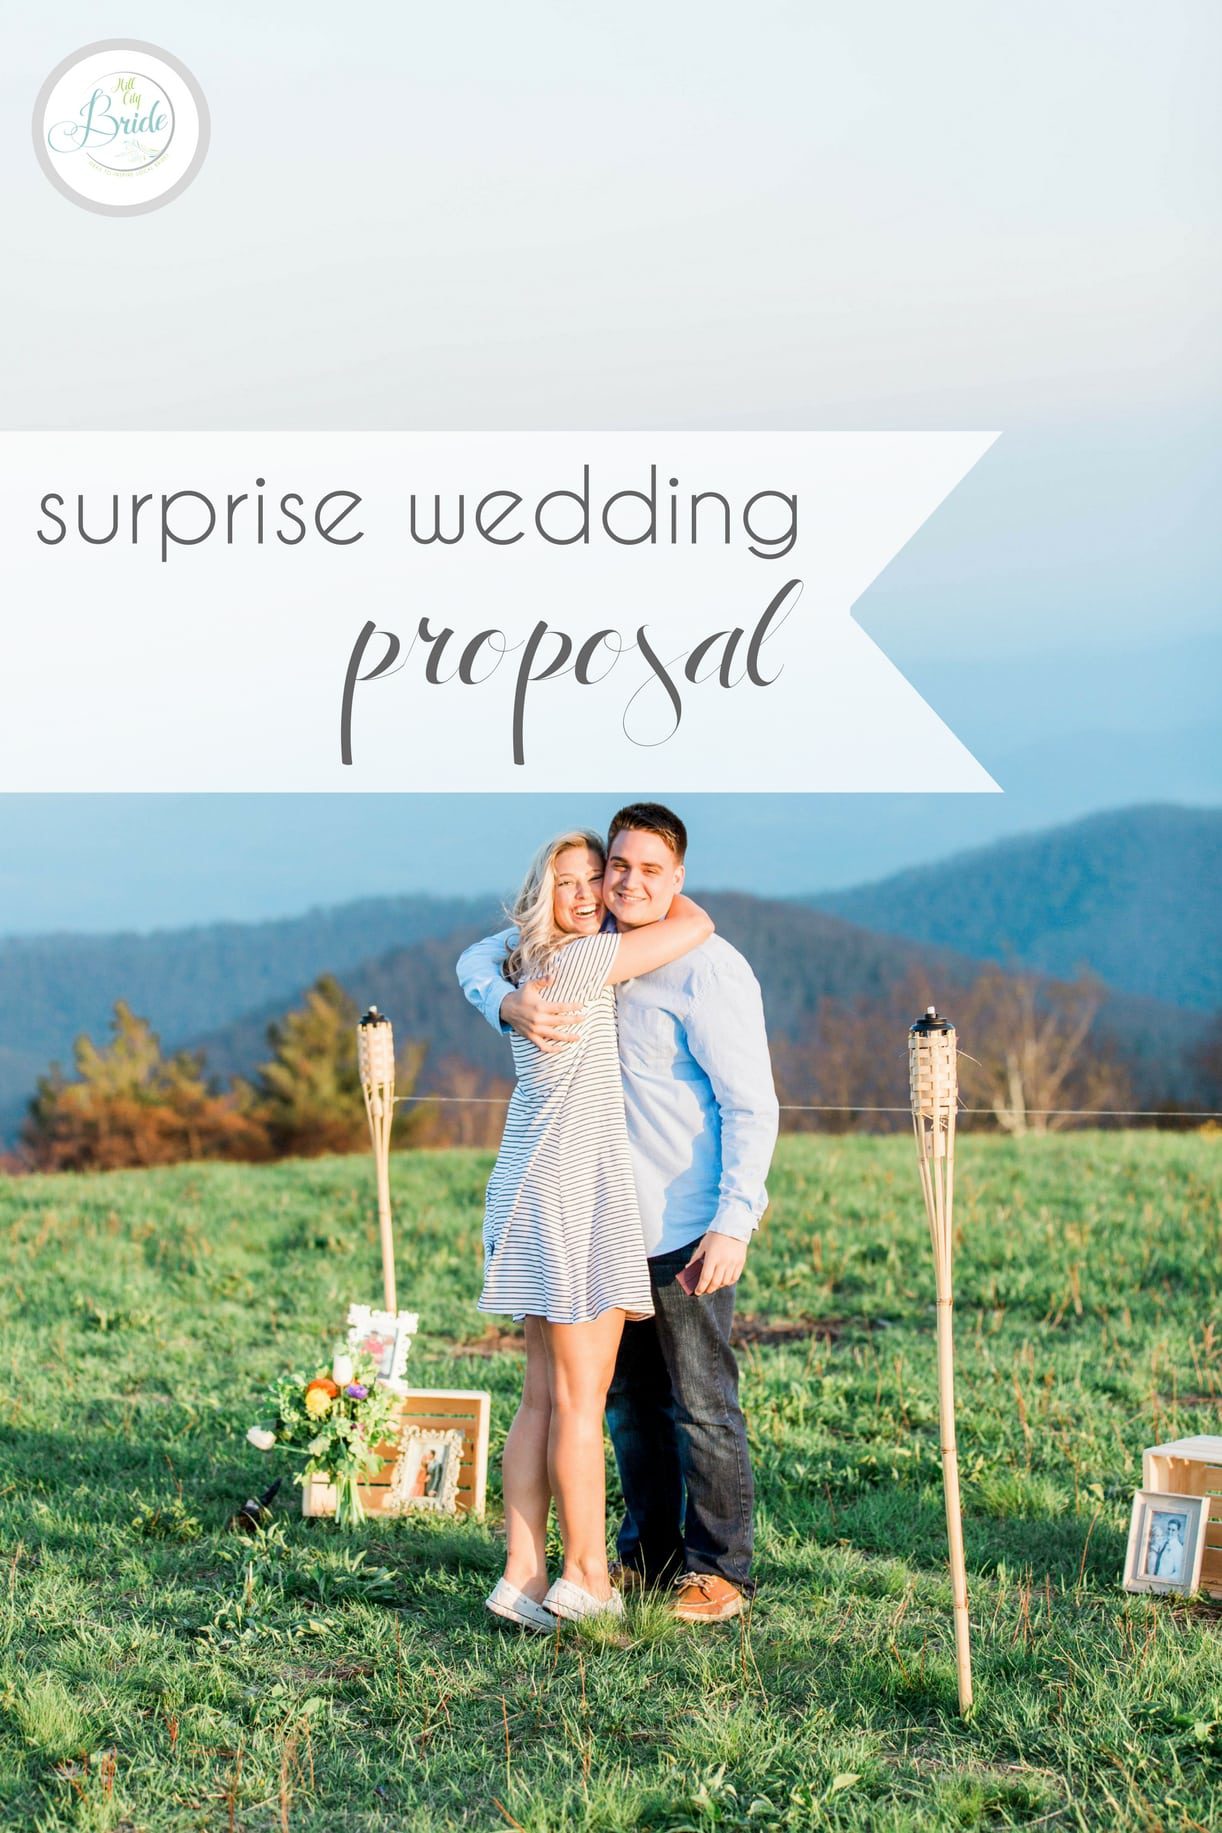 Virginia Surprise Wedding Proposal as seen on Hill City Bride Blog - engagement, engaged, story